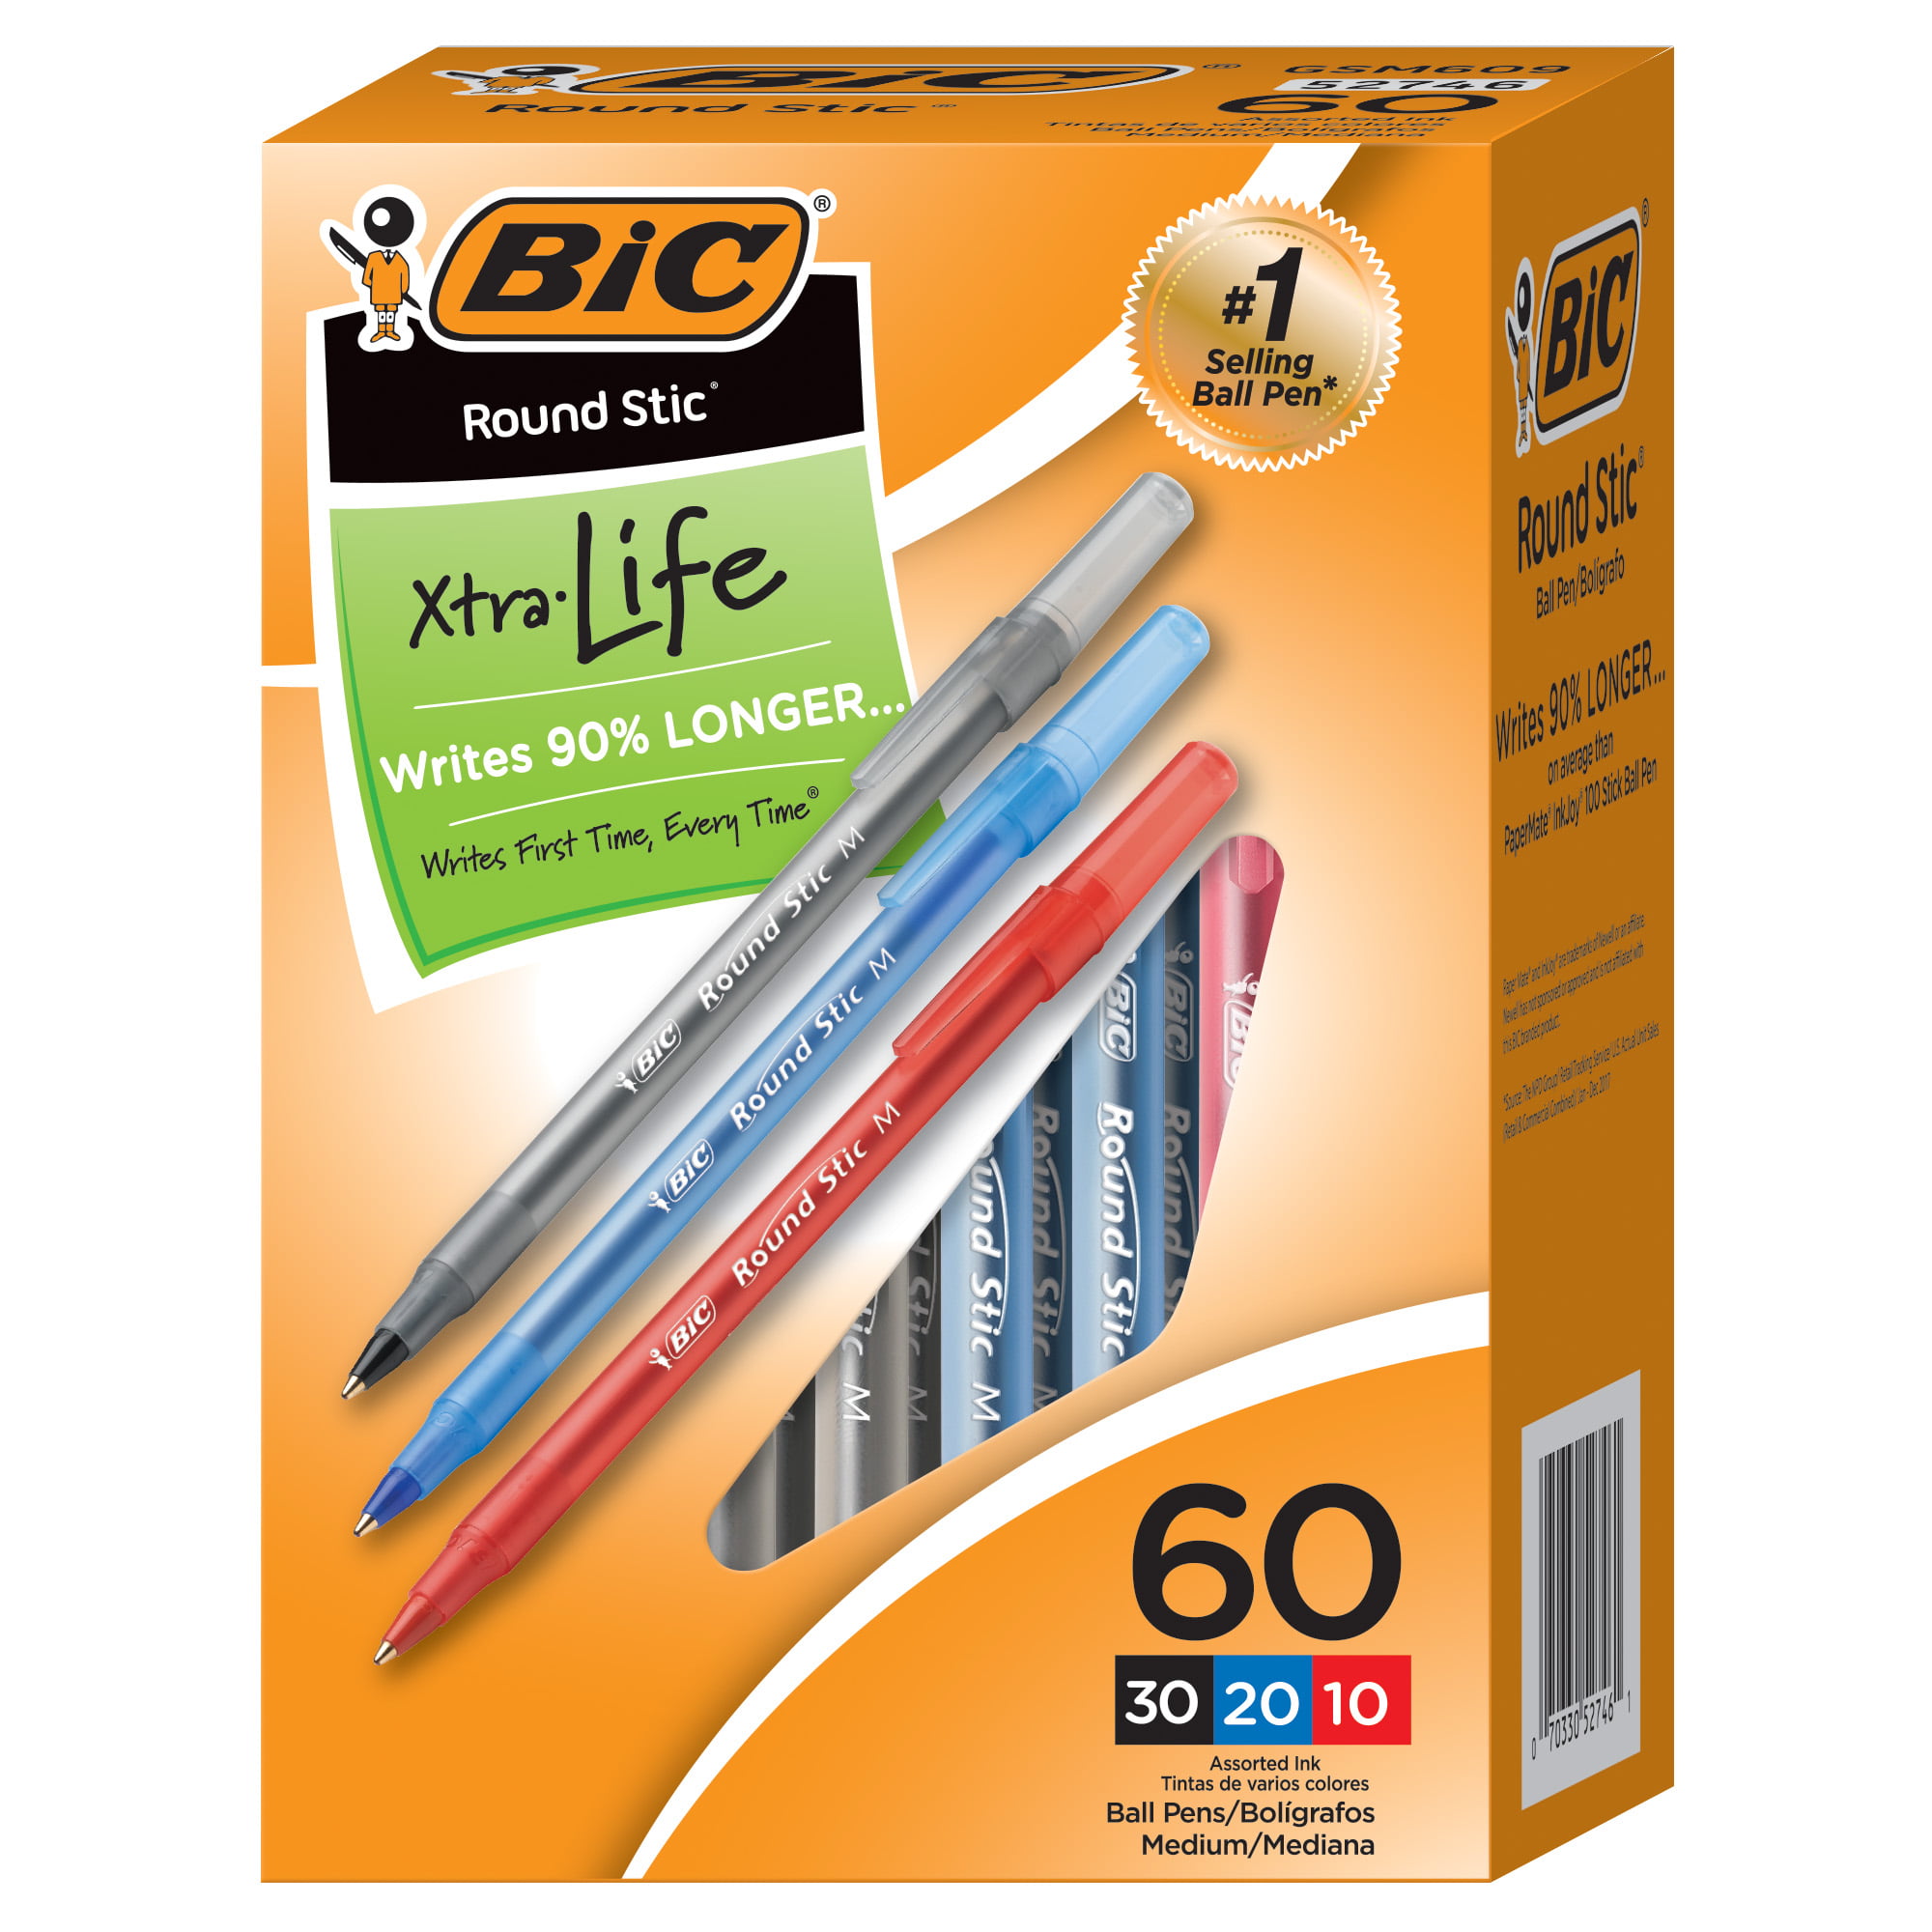 BIC Round Stic Xtra Life Ballpoint Pen Medium Point 10mm School Blue for sale online 60 Count 